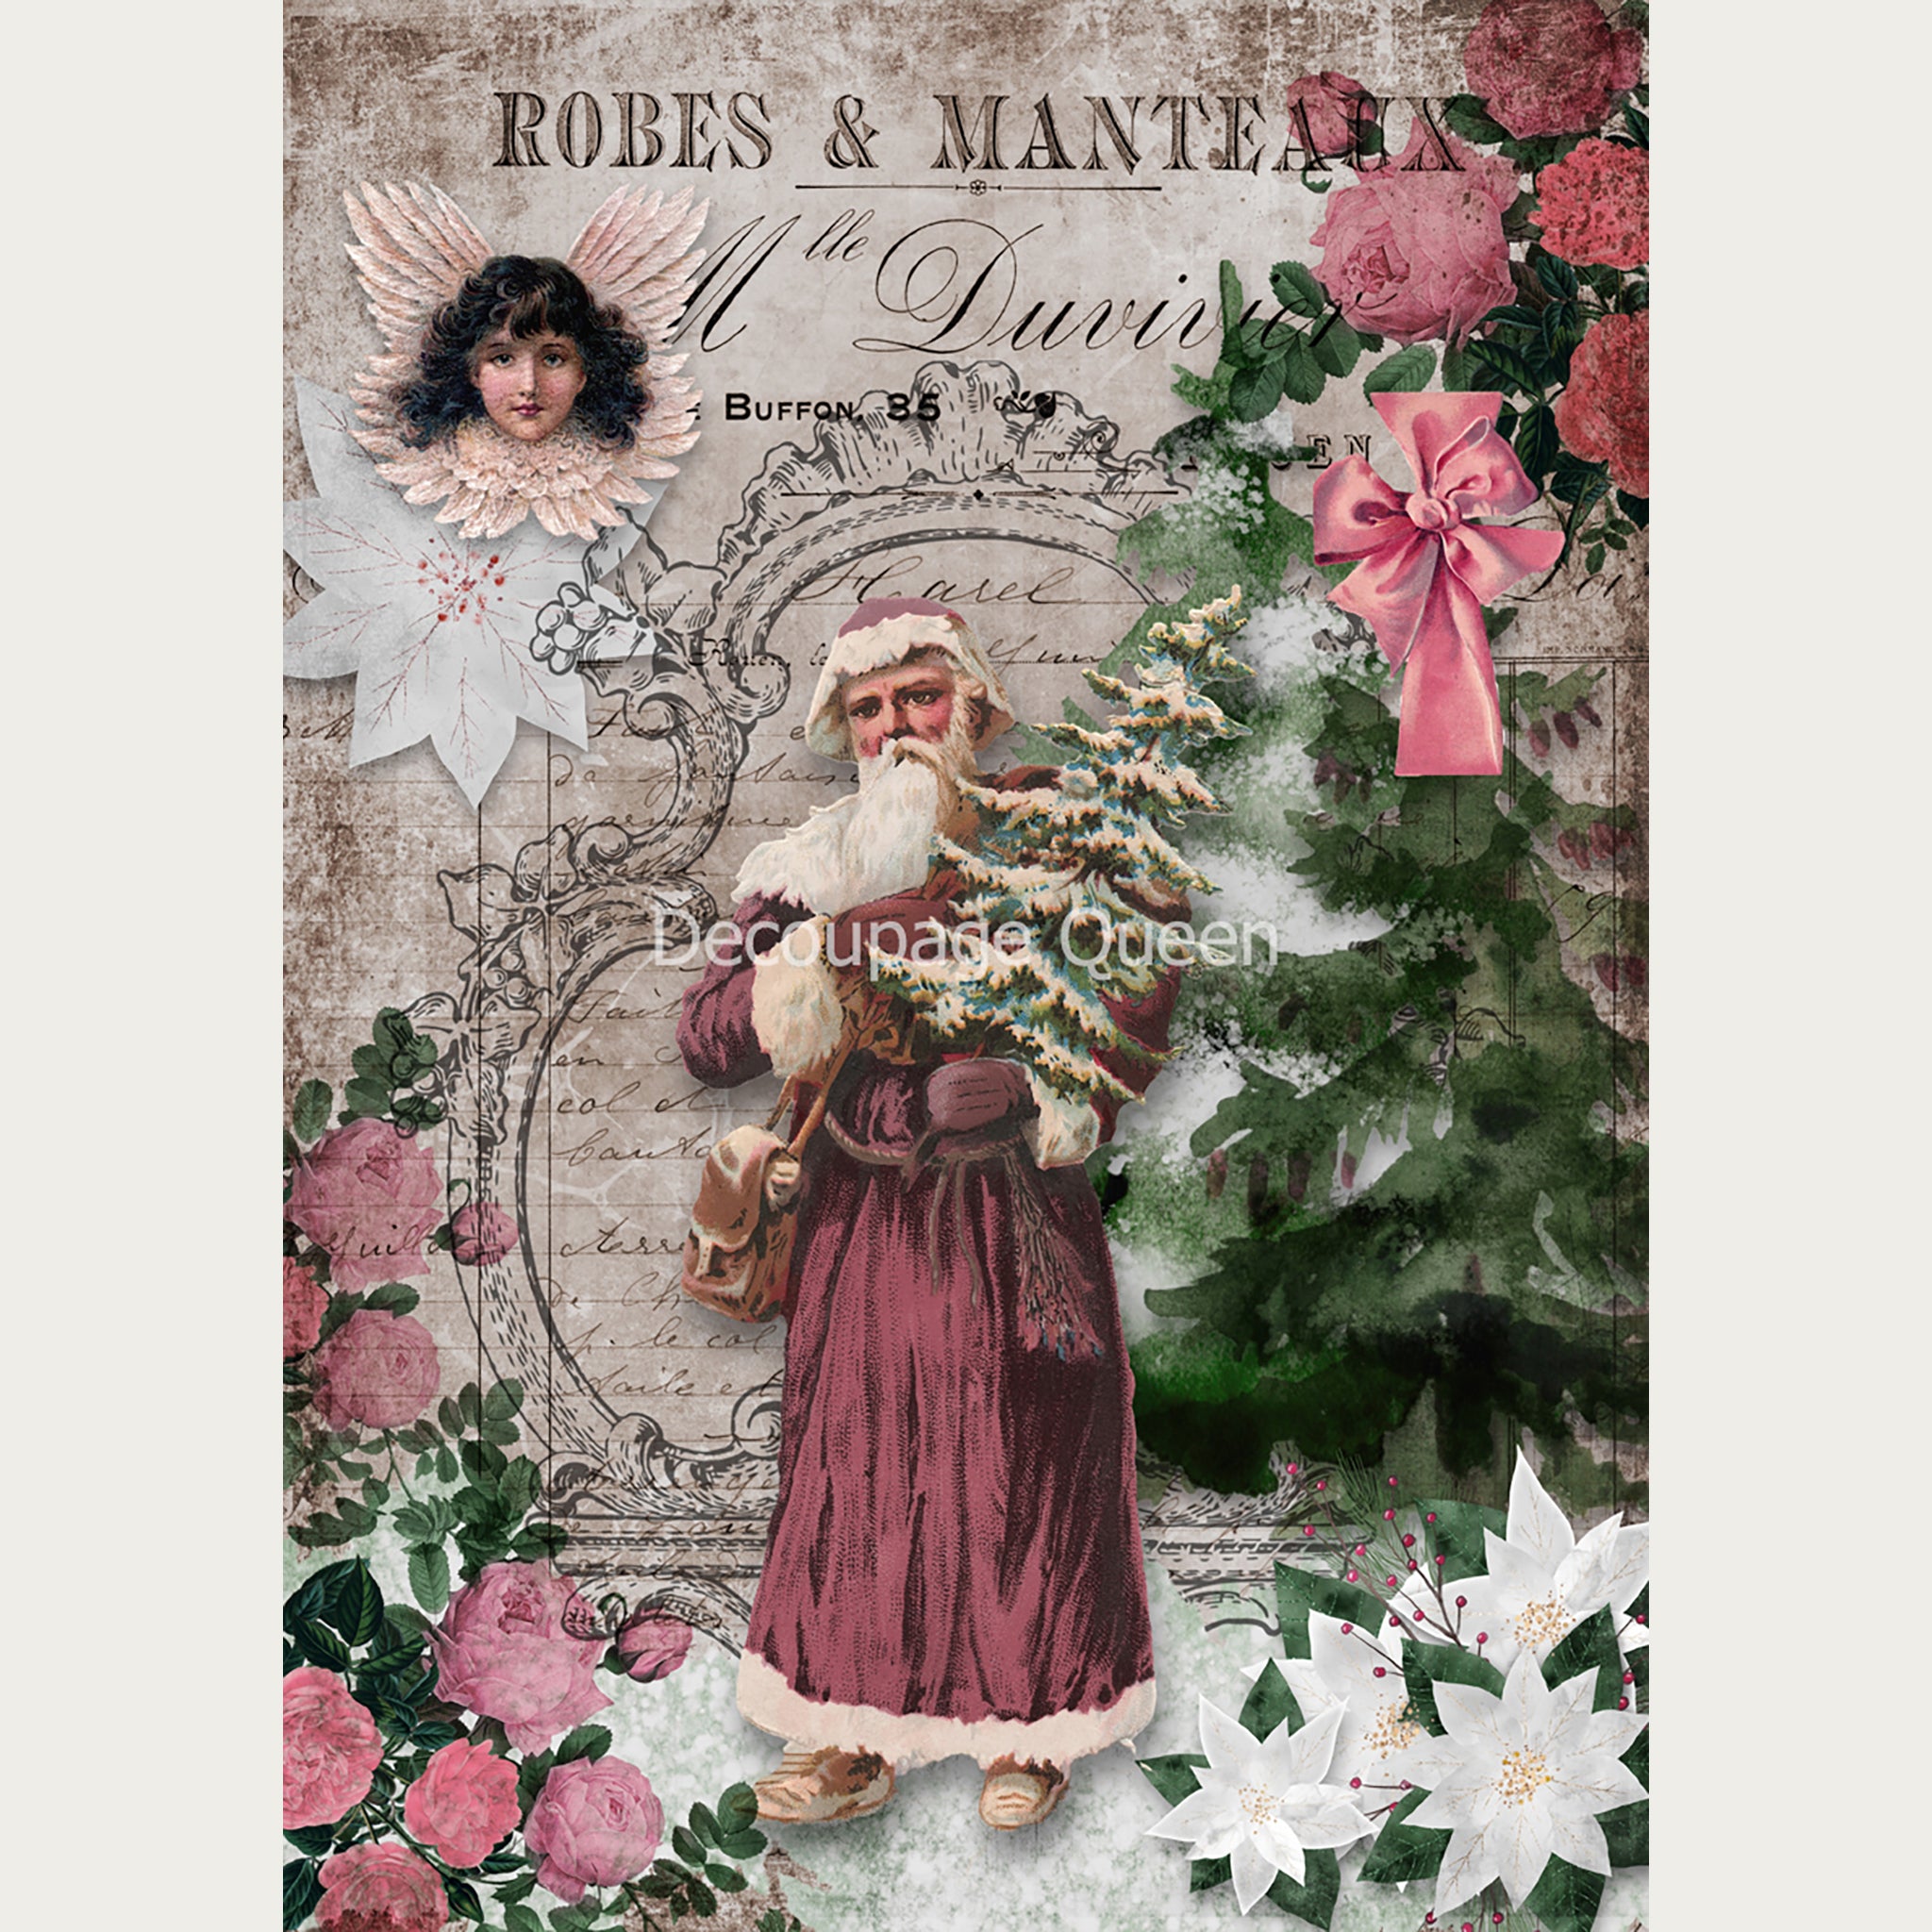 A3 rice paper design of a vintage Santa holding a small pine tree on a background with pink and white flowers and a large watercolor pine tree. White borders are on the sides.